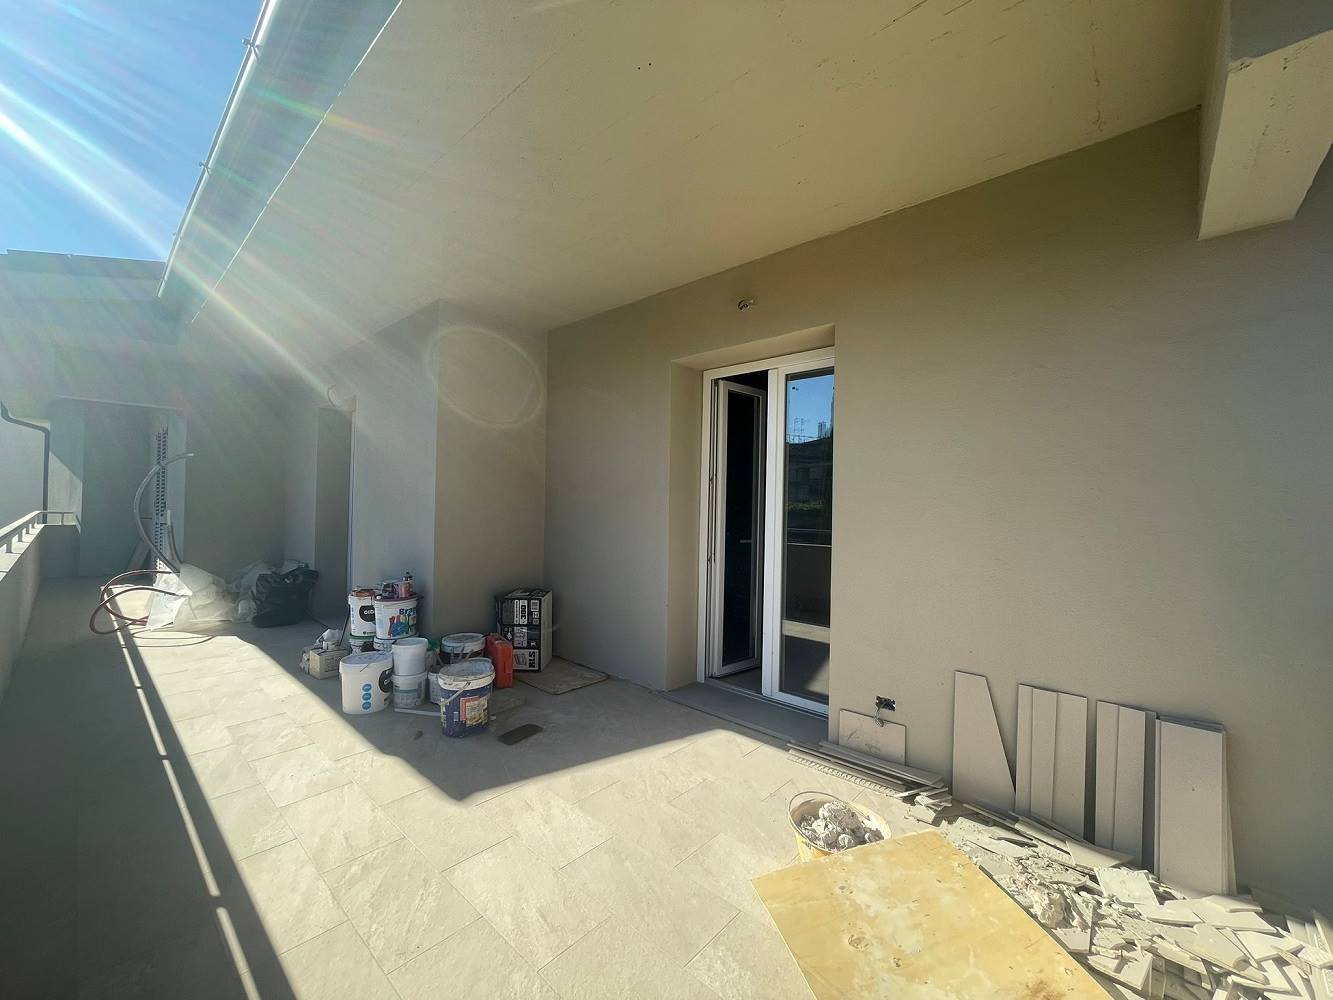 FIGLINE E INCISA VALDARNO, Apartment for sale of 110 Sq. mt., New construction, Heating To floor, Energetic class: A, placed at 1°, composed by: 5 